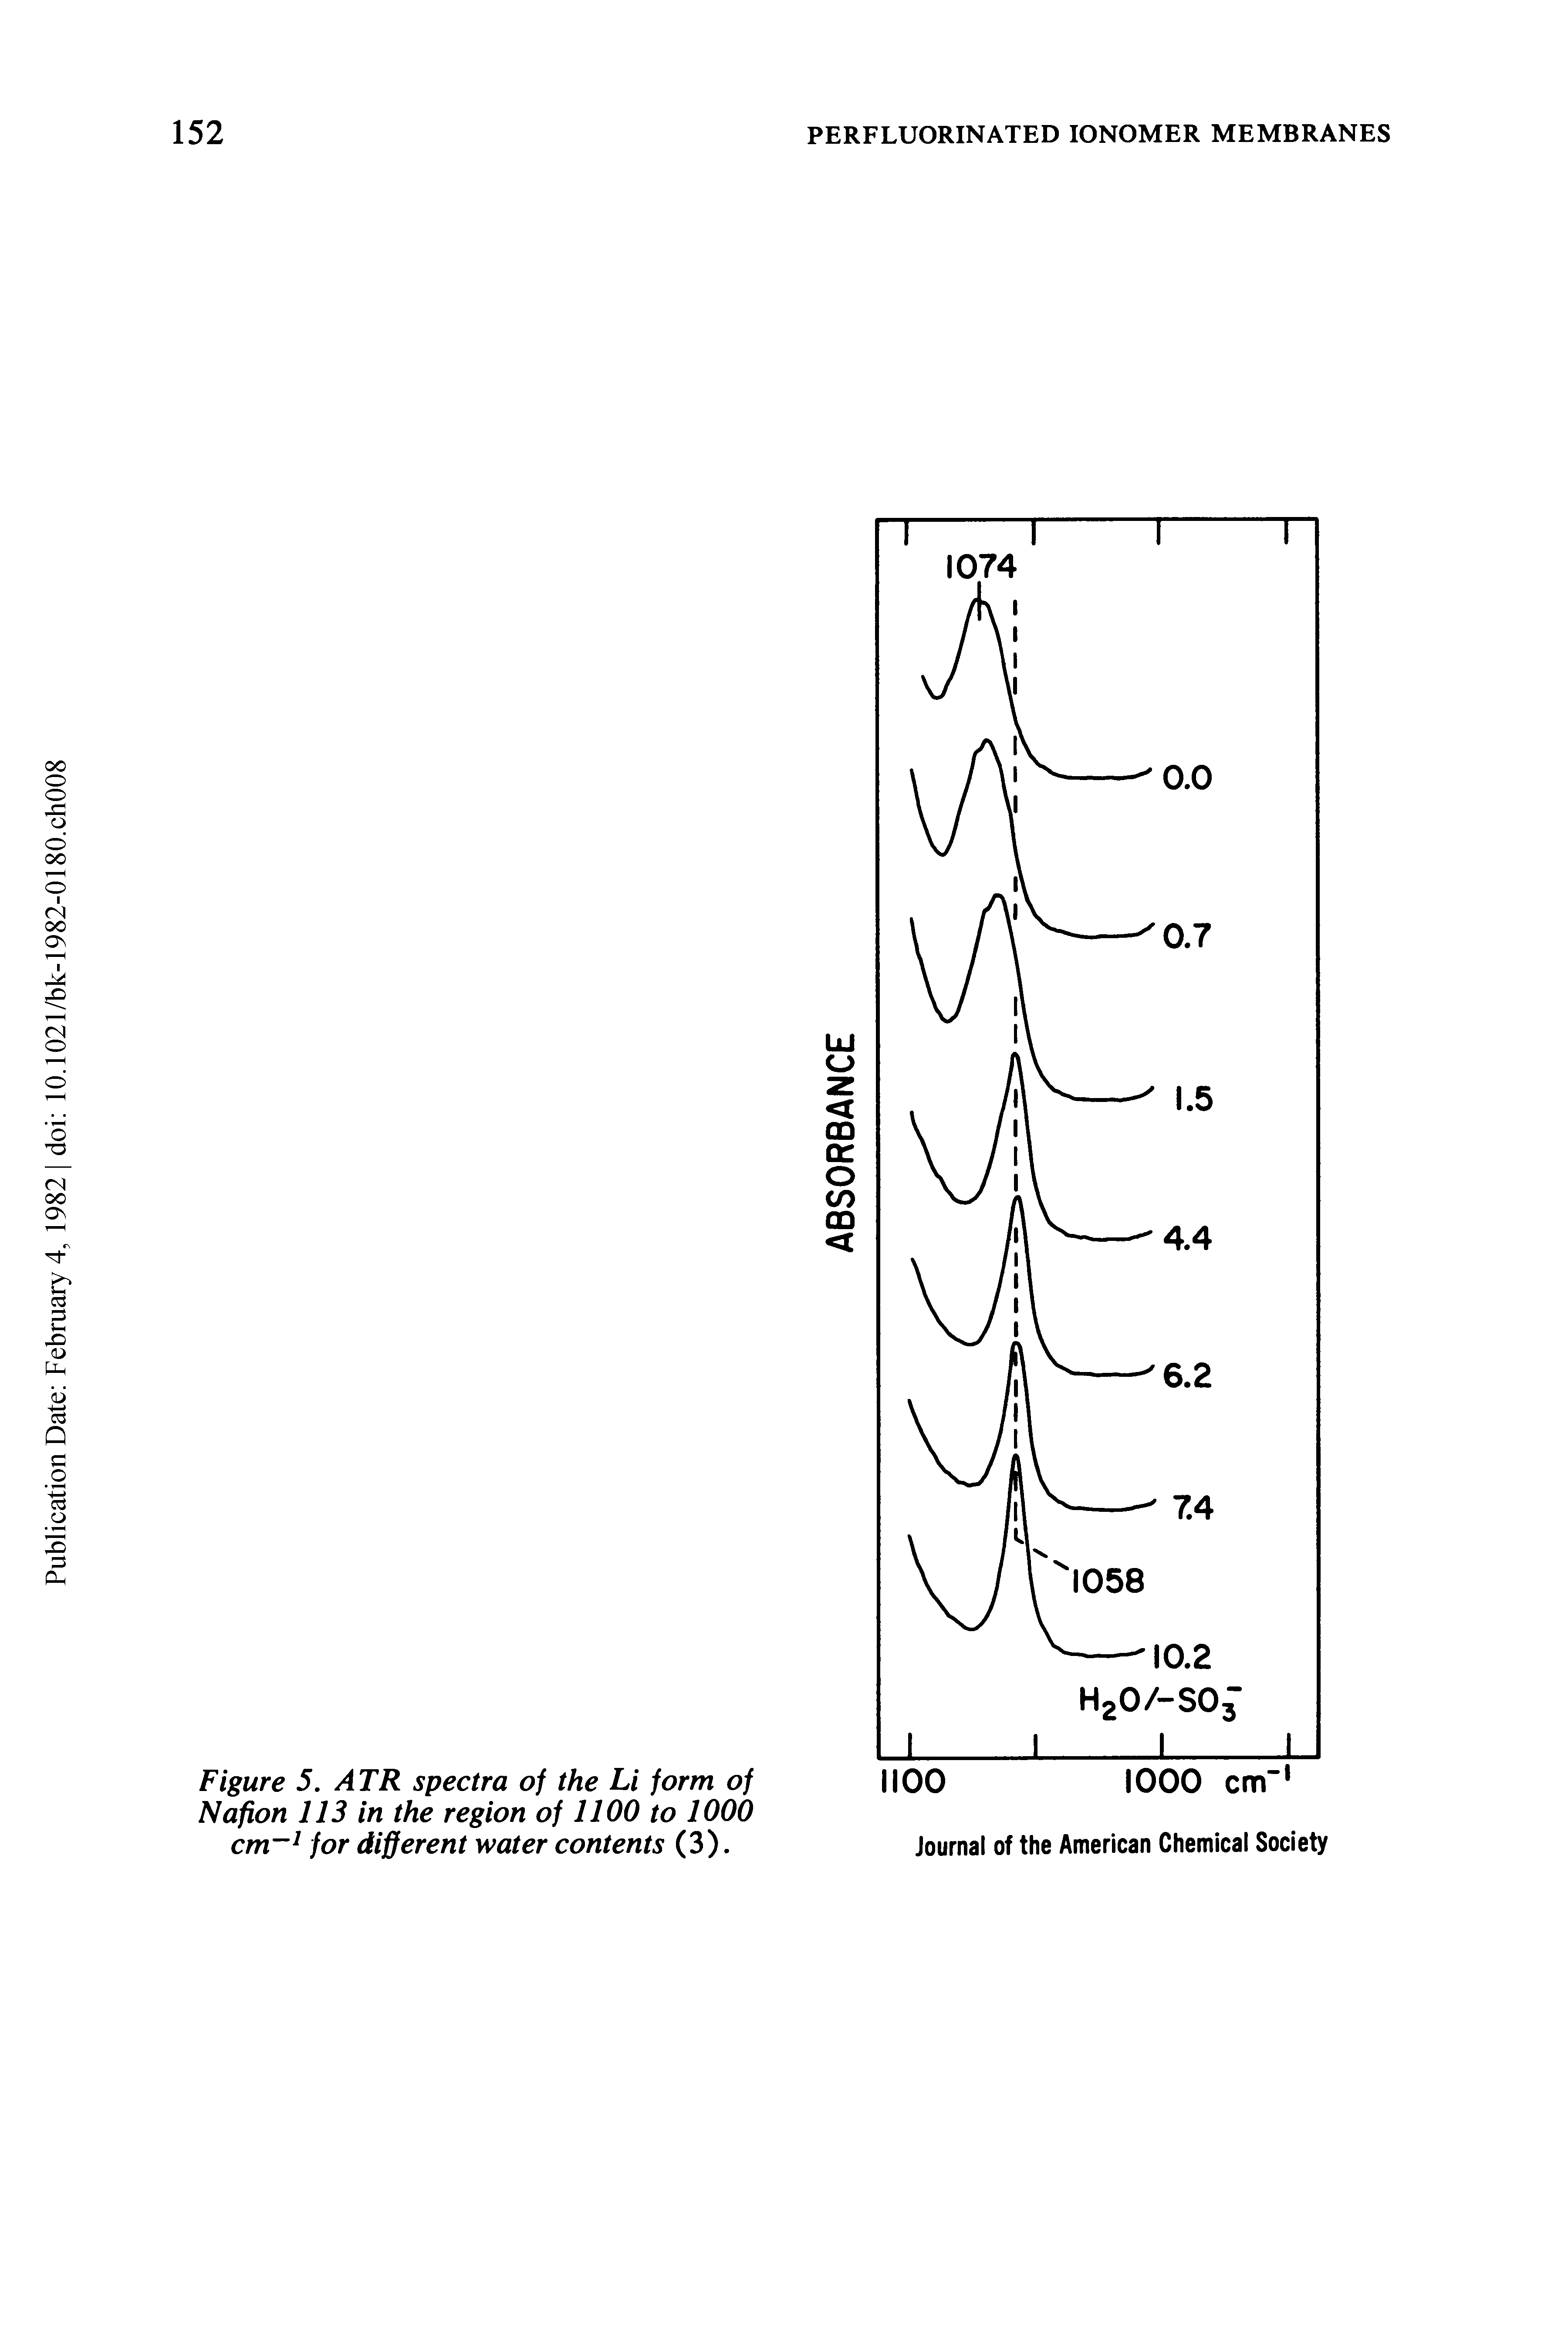 Figure 5. ATR spectra of the Li form of Nafion 113 in the region of 1100 to 1000 cm 1 for different water contents (3).